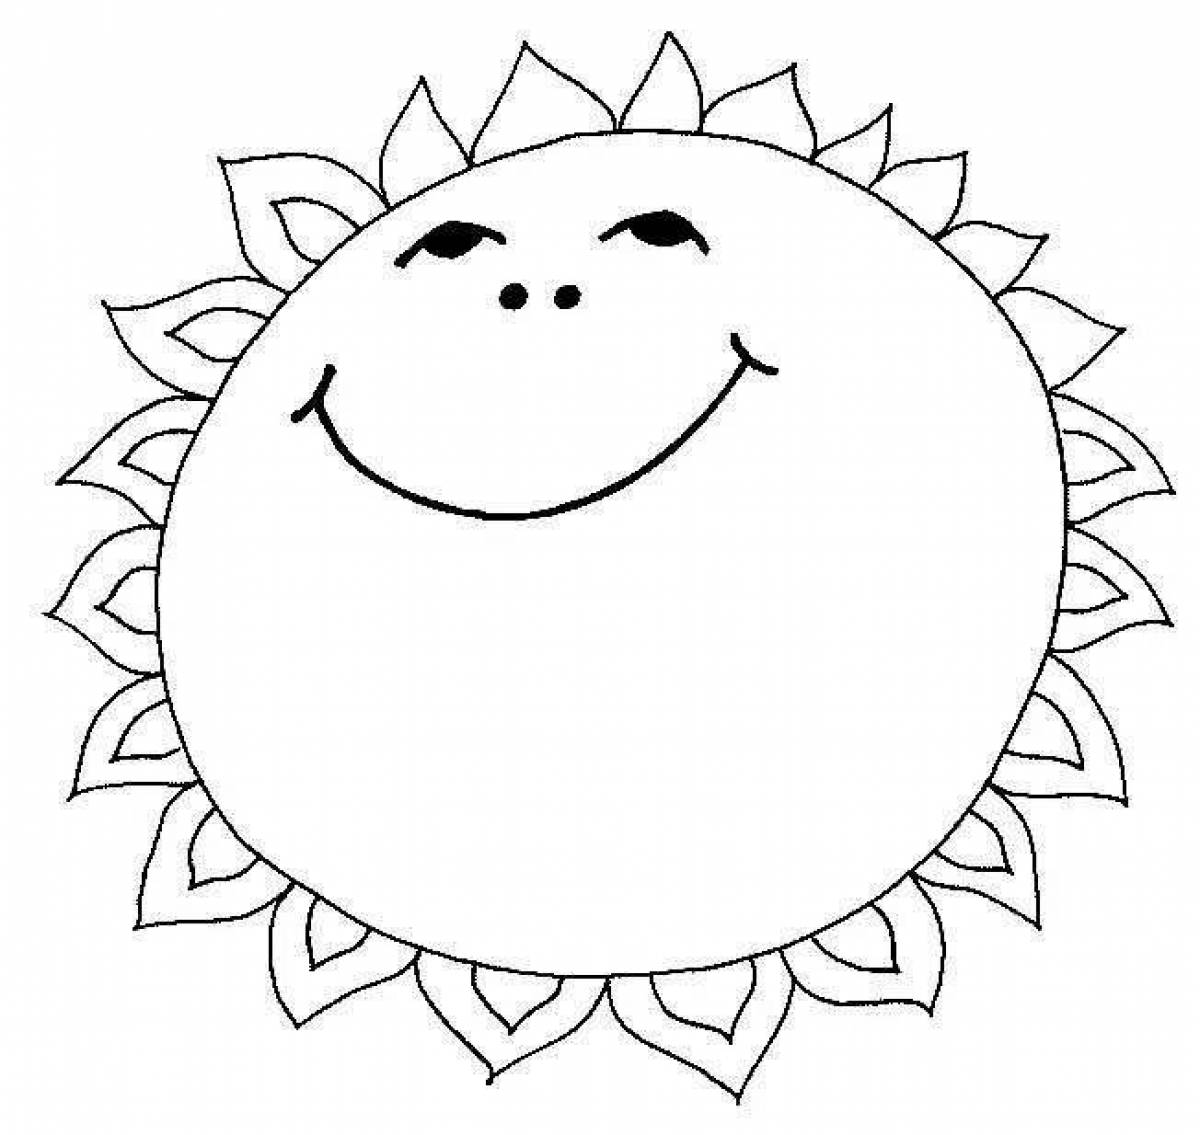 Bright coloring sun picture for kids